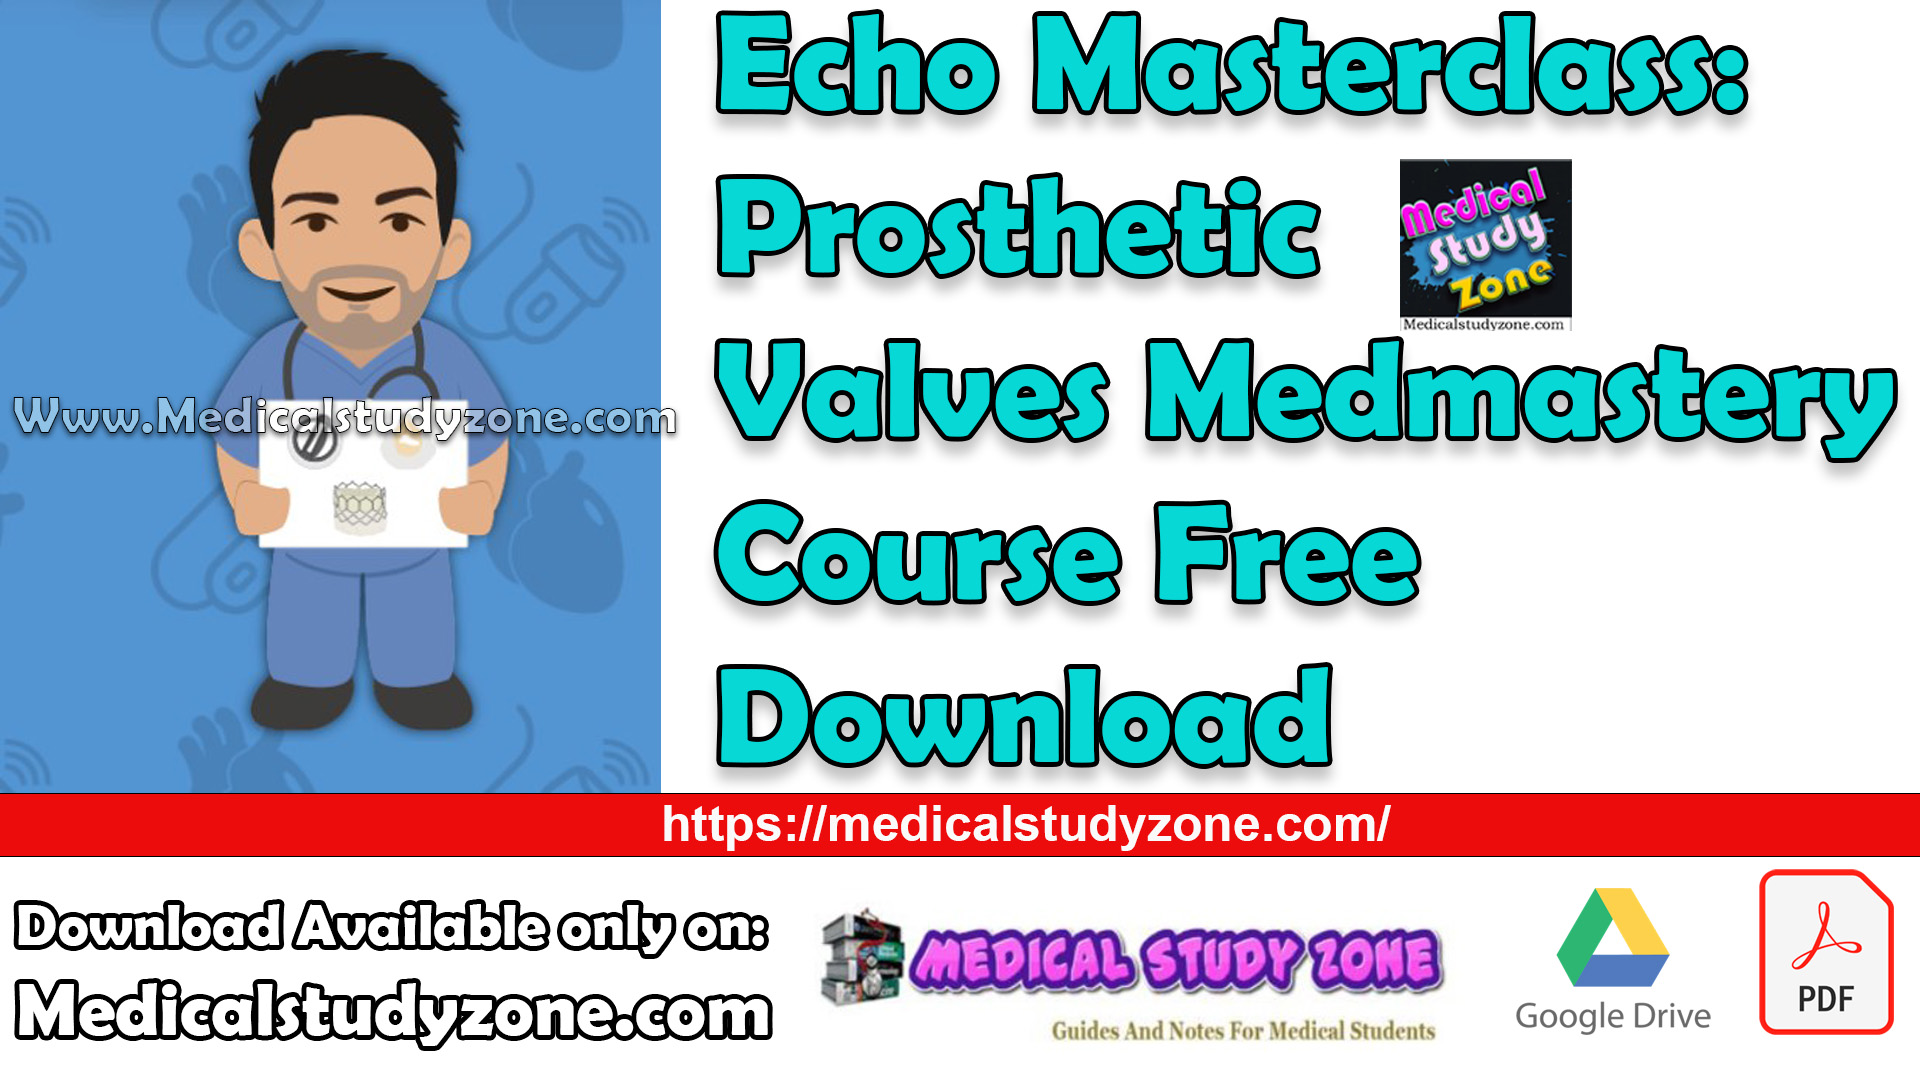 Echo Masterclass: Prosthetic Valves Medmastery Course Free Download